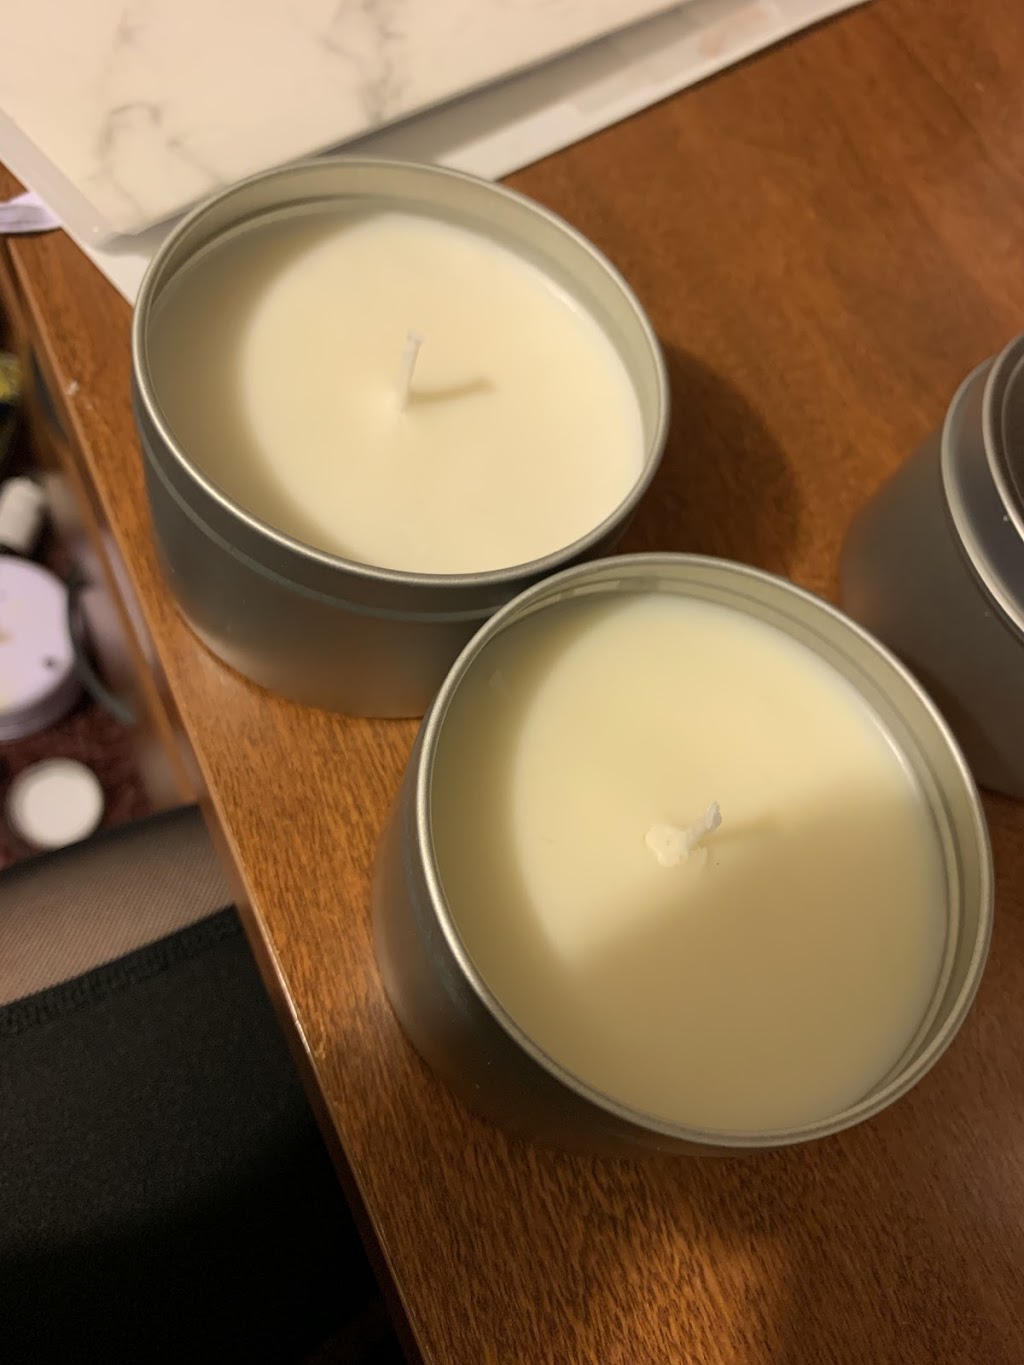 Fragrant Vibes Candles | 10105 Riverwood Ave, Noblesville, IN 46062, USA | Phone: (317) 612-7114